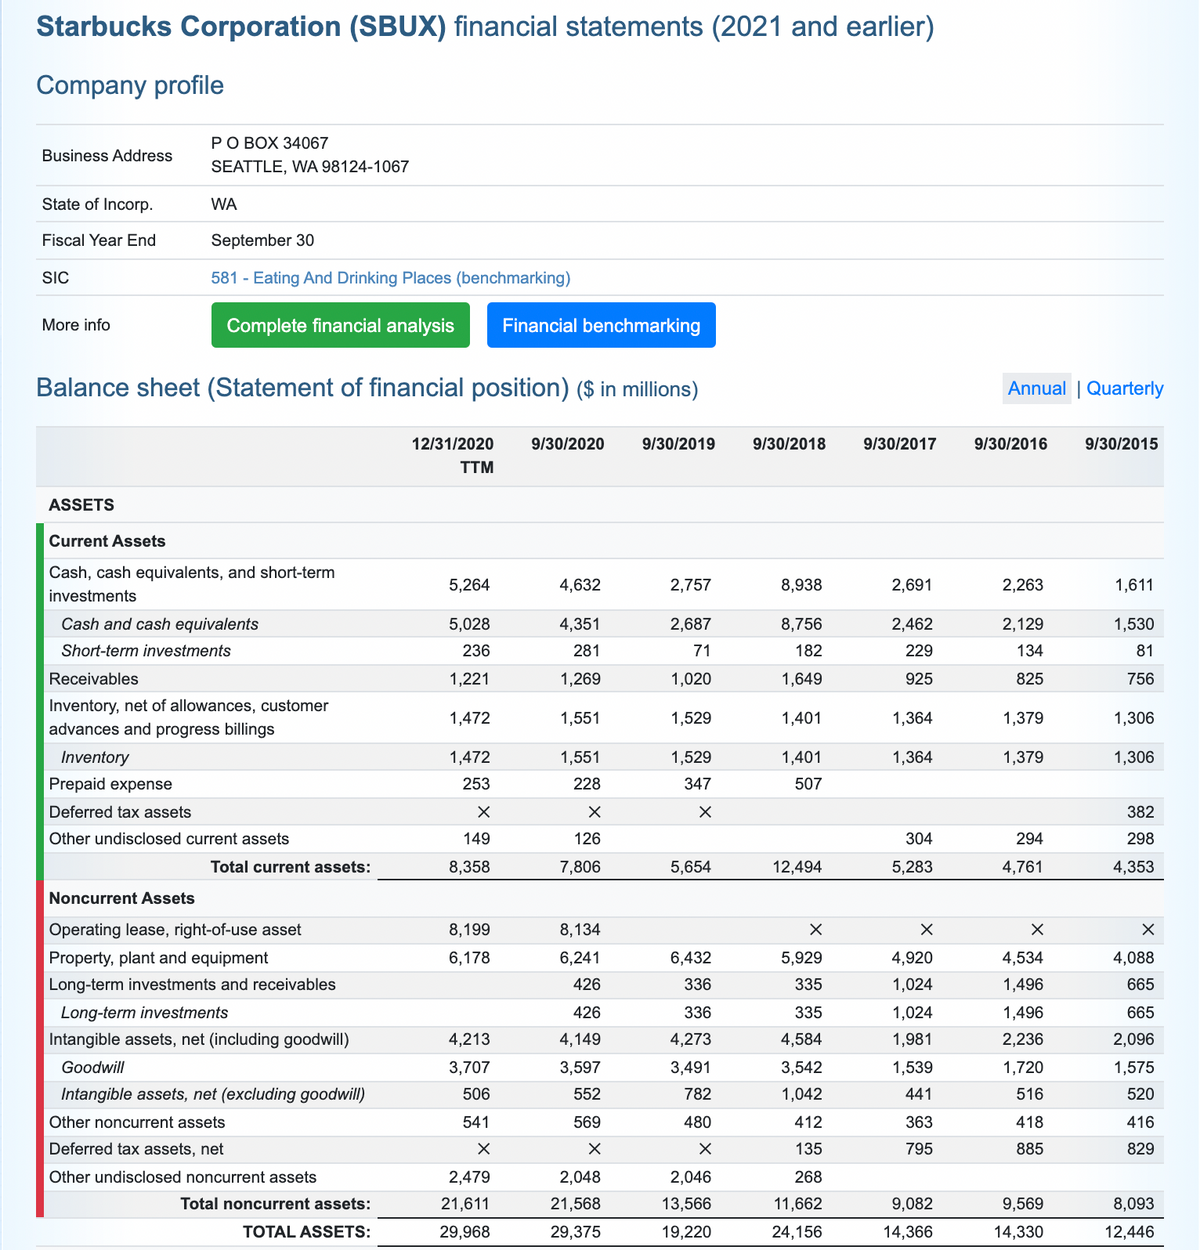 Starbucks Corporation (SBUX) financial statements (2021 and earlier)
Company profile
РО ВОХ 34067
Business Address
SEATTLE, WA 98124-1067
State of Incorp.
WA
Fiscal Year End
September 30
SIC
581 - Eating And Drinking Places (benchmarking)
More info
Complete financial analysis
Financial benchmarking
Balance sheet (Statement of financial position) ($ in millions)
Annual | Quarterly
12/31/2020
9/30/2020
9/30/2019
9/30/2018
9/30/2017
9/30/2016
9/30/2015
TTM
ASSETS
Current Assets
Cash, cash equivalents, and short-term
5,264
4,632
2,757
8,938
2,691
2,263
1,611
investments
Cash and cash equivalents
5,028
4,351
2,687
8,756
2,462
2,129
1,530
Short-term investments
236
281
71
182
229
134
81
Receivables
1,221
1,269
1,020
1,649
925
825
756
Inventory, net of allowances, customer
advances and progress billings
1,472
1,551
1,529
1,401
1,364
1,379
1,306
Inventory
1,472
1,551
1,529
1,401
1,364
1,379
1,306
Prepaid expense
253
228
347
507
Deferred tax assets
382
Other undisclosed current assets
149
126
304
294
298
Total current assets:
8,358
7,806
5,654
12,494
5,283
4,761
4,353
Noncurrent Assets
Operating lease, right-of-use asset
8,199
8,134
Property, plant and equipment
6,178
6,241
6,432
5,929
4,920
4,534
4,088
Long-term investments and receivables
426
336
335
1,024
1,496
665
Long-term investments
426
336
335
1,024
1,496
665
Intangible assets, net (including goodwill)
4,213
4,149
4,273
4,584
1,981
2,236
2,096
Goodwill
3,707
3,597
3,491
3,542
1,539
1,720
1,575
Intangible assets, net (excluding goodwill)
506
552
782
1,042
441
516
520
Other noncurrent assets
541
569
480
412
363
418
416
Deferred tax assets, net
135
795
885
829
Other undisclosed noncurrent assets
2,479
2,048
2,046
268
Total noncurrent assets:
21,611
21,568
13,566
11,662
9,082
9,569
8,093
TOTAL ASSETS:
29,968
29,375
19,220
24,156
14,366
14,330
12,446
